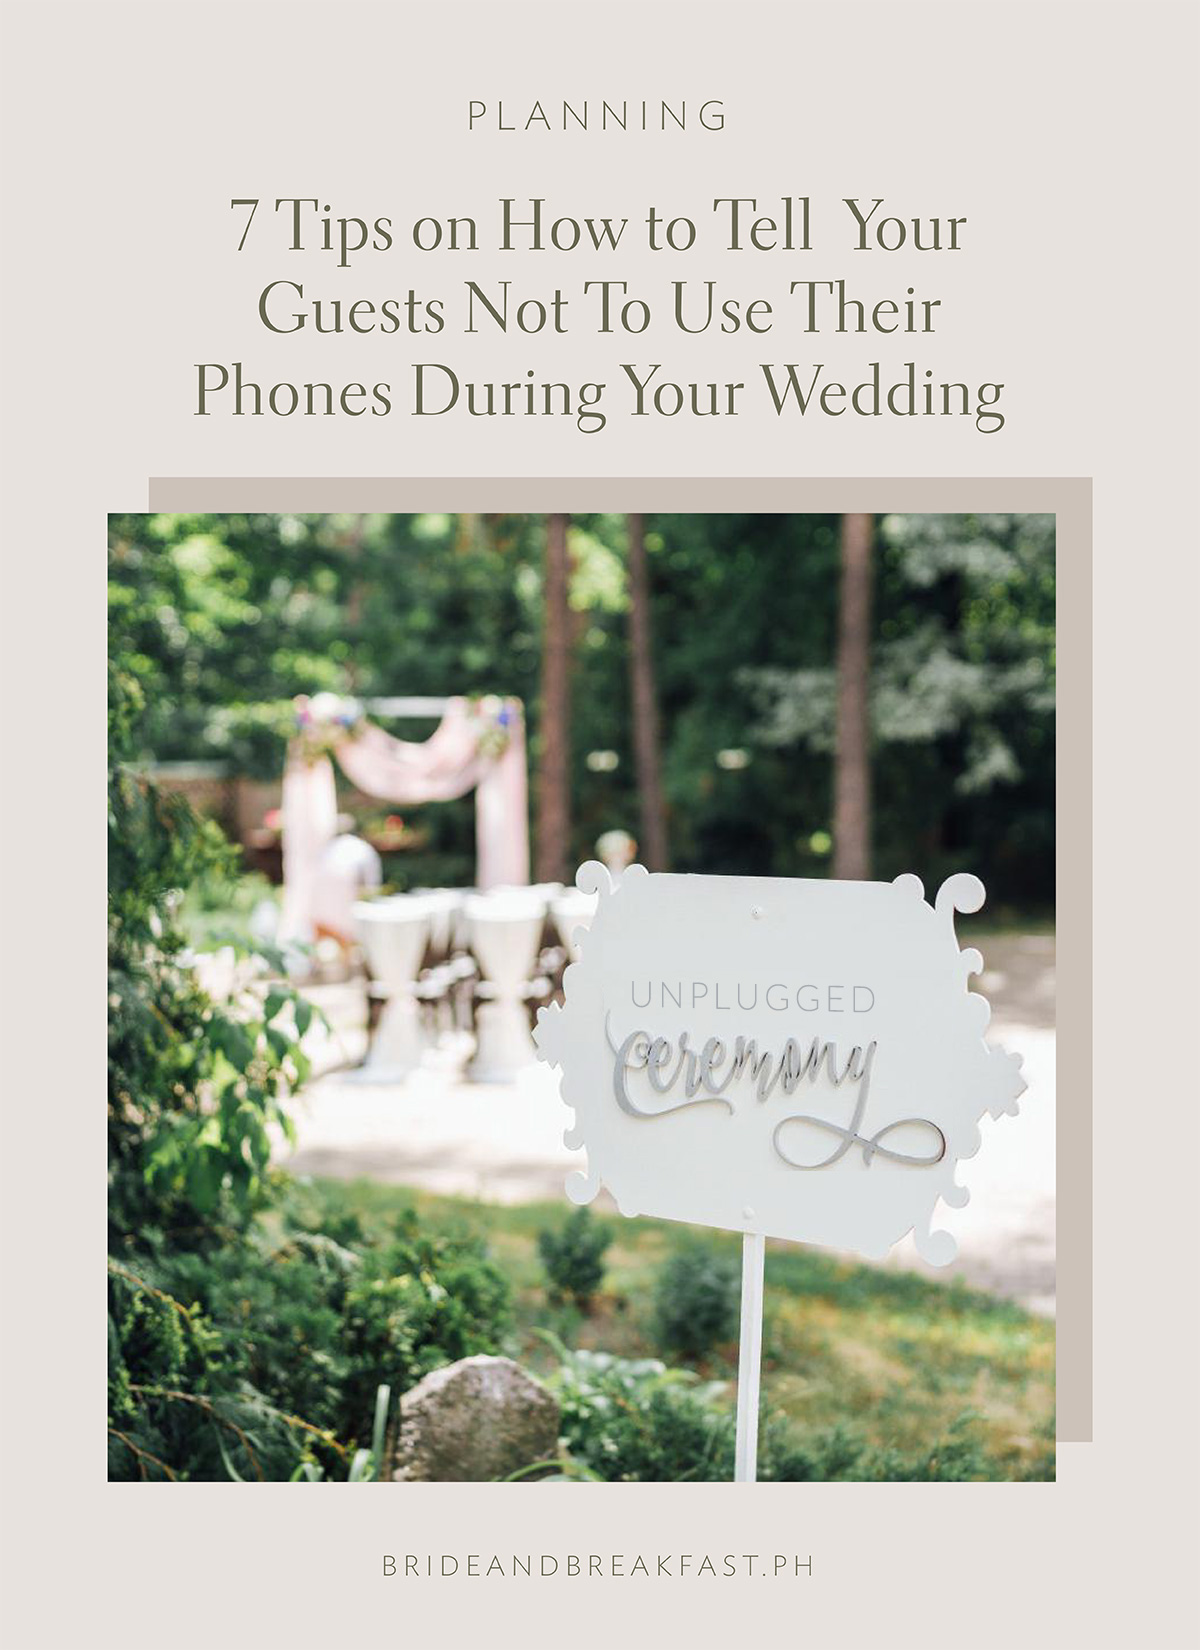 7 Tips on How to Tell Your Guests Not to Use Their Phones During Your Wedding